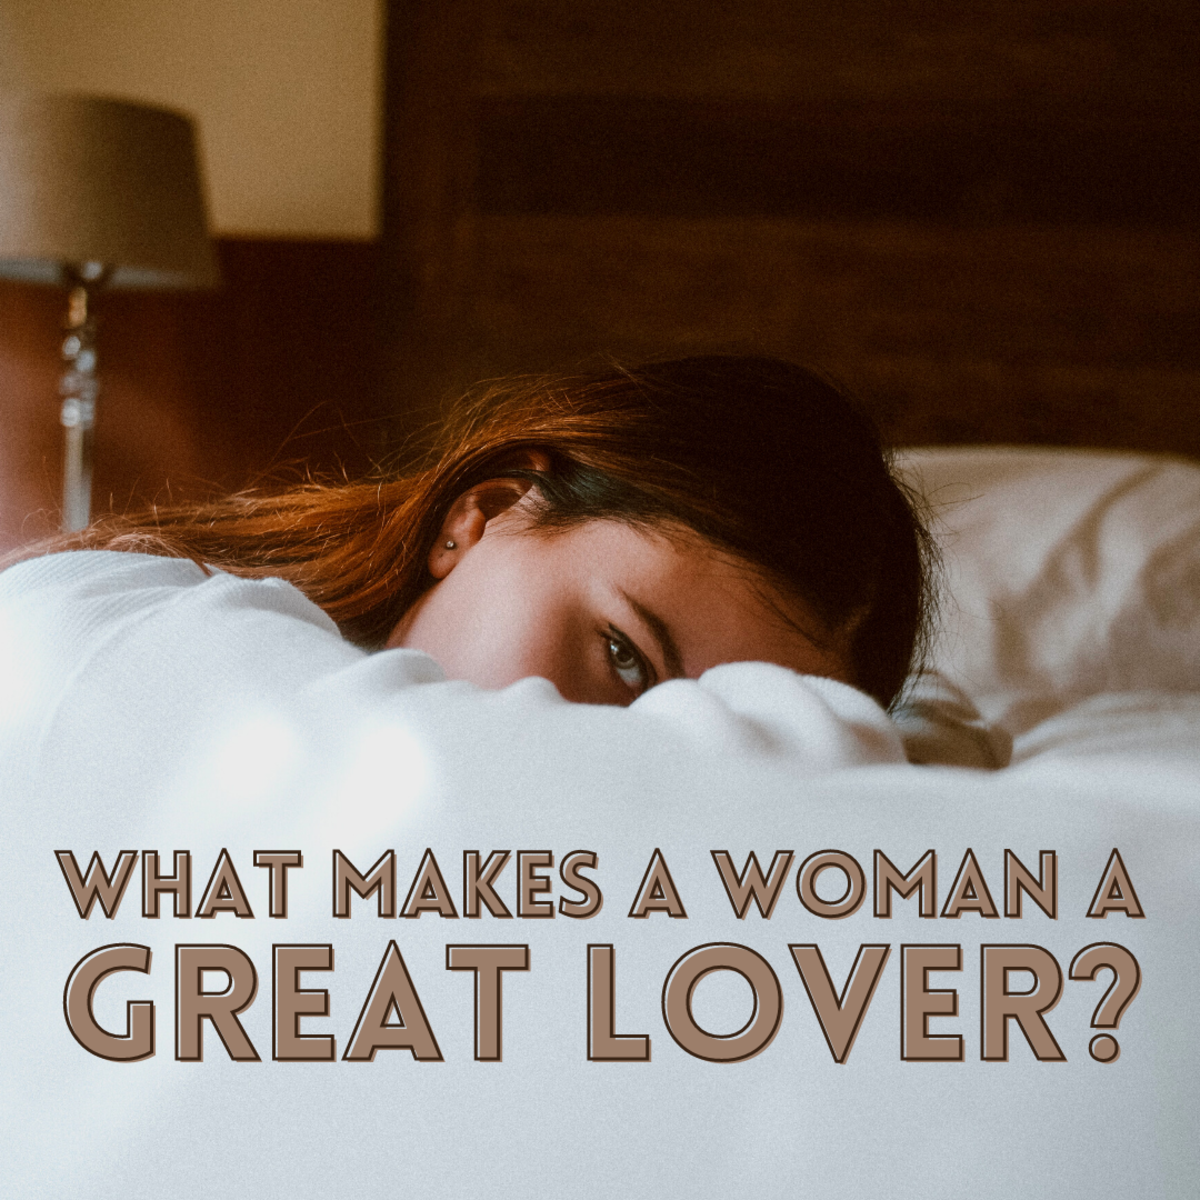 What qualities make a woman good in bed? Read on to find out!